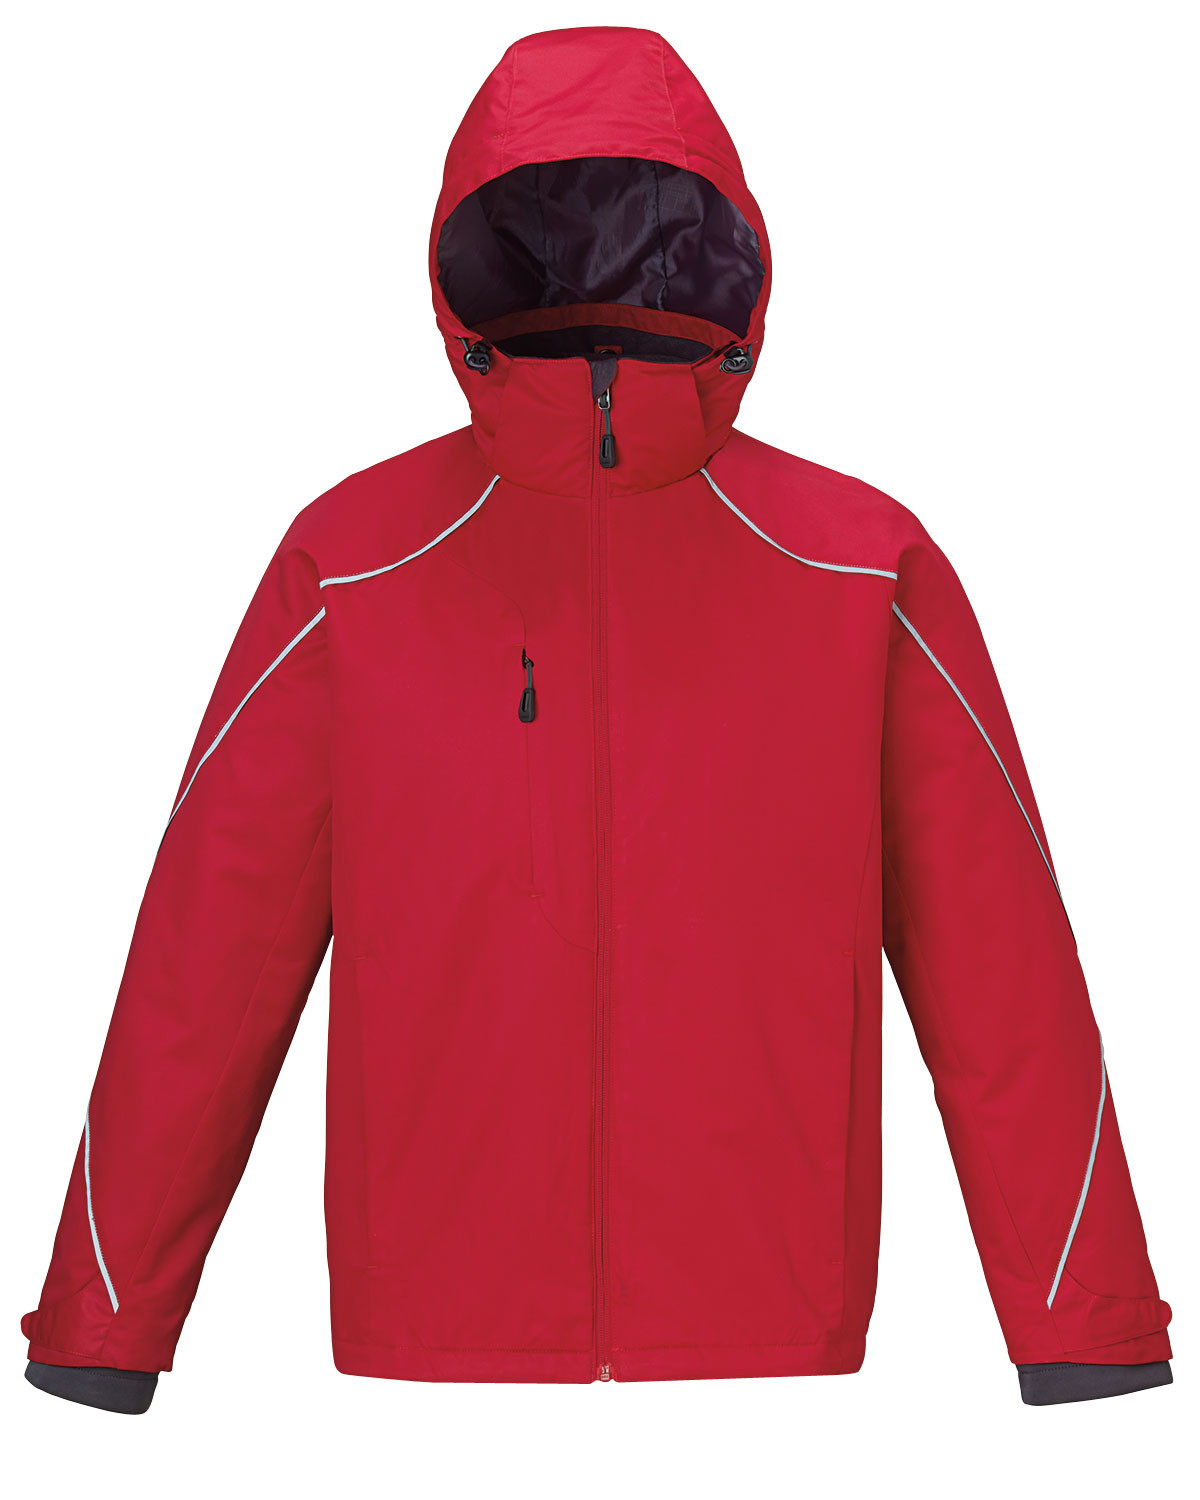 North End 88196T - Men's Tall Angle 3-In-1 Jacket With With Bonded Fleece Liner